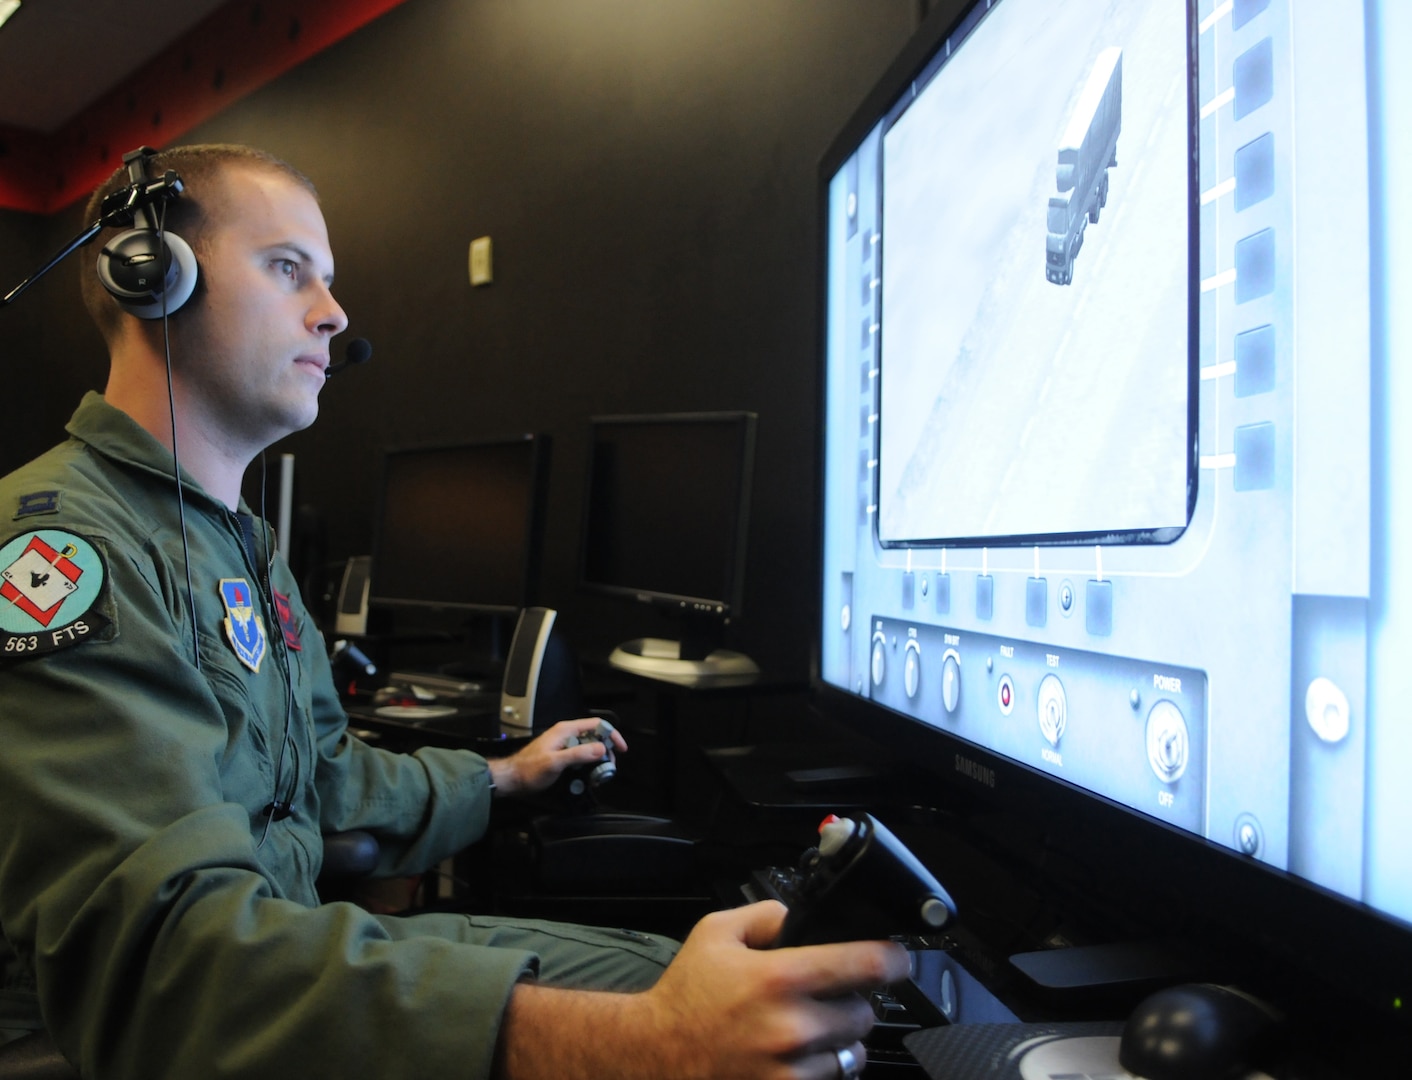 Capt. Sam Allen, 563rd Flying Training Squadron instructor and Unmanned Aerial Systems Unmanned Flight Course director, operates the controls of a battlespace simulator in the course's laboratory. The four-week UFC course begins Nov. 21. (U.S. Air Force photo by Rich McFadden) 